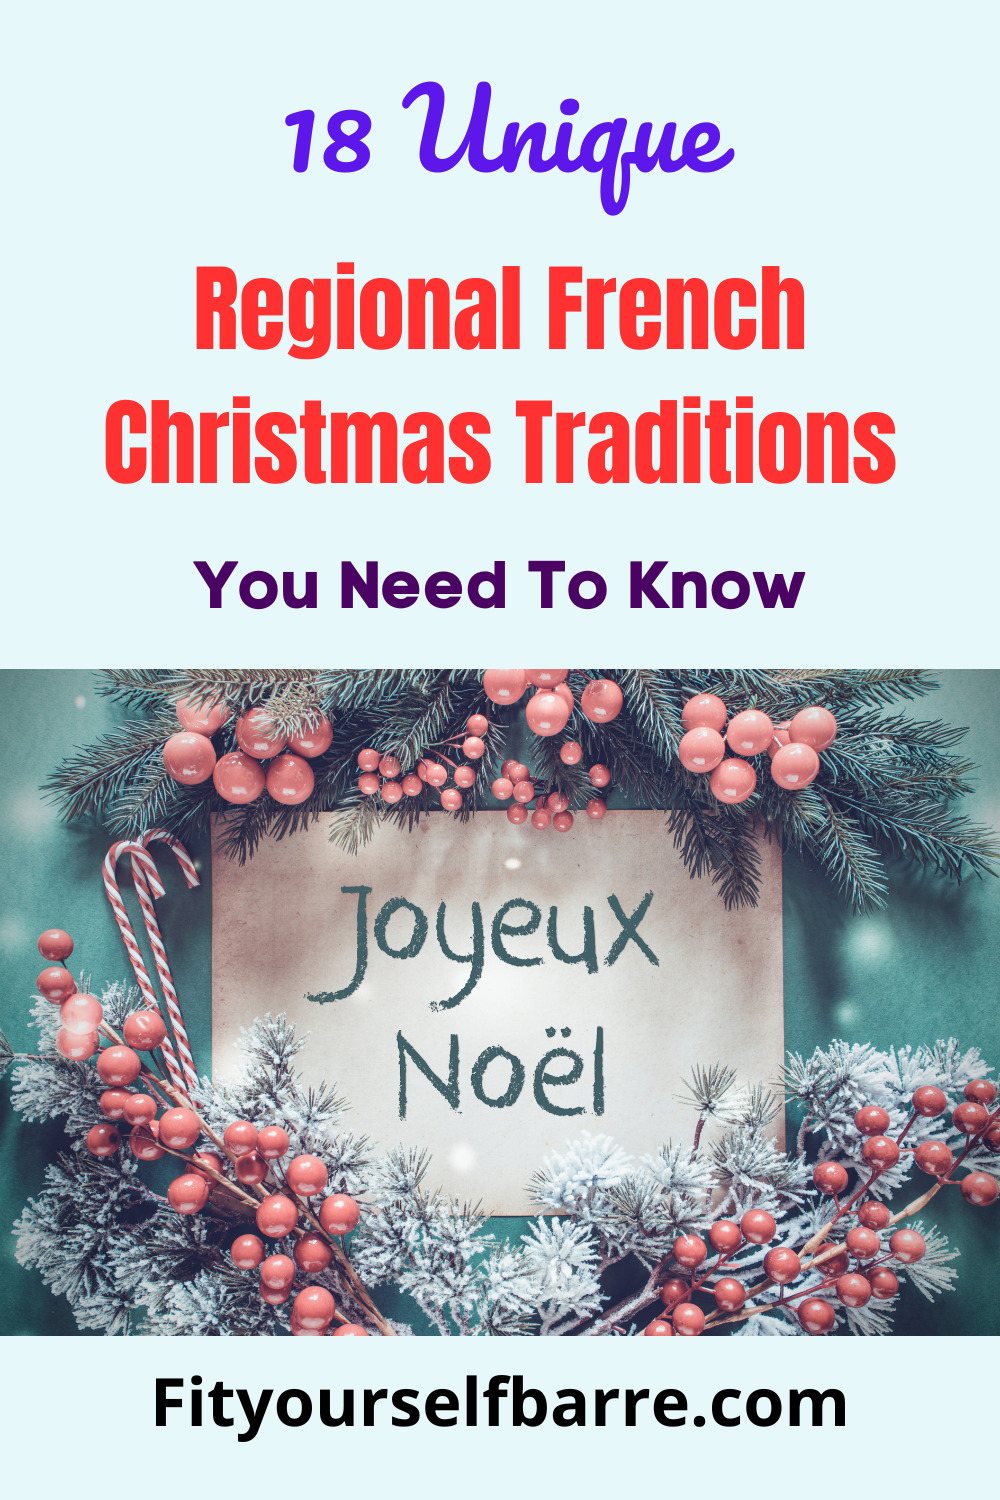 regional Christmas traditions in France-French text on brown paper-Christmas garland with fir tree branch and pink decoration-greenish background